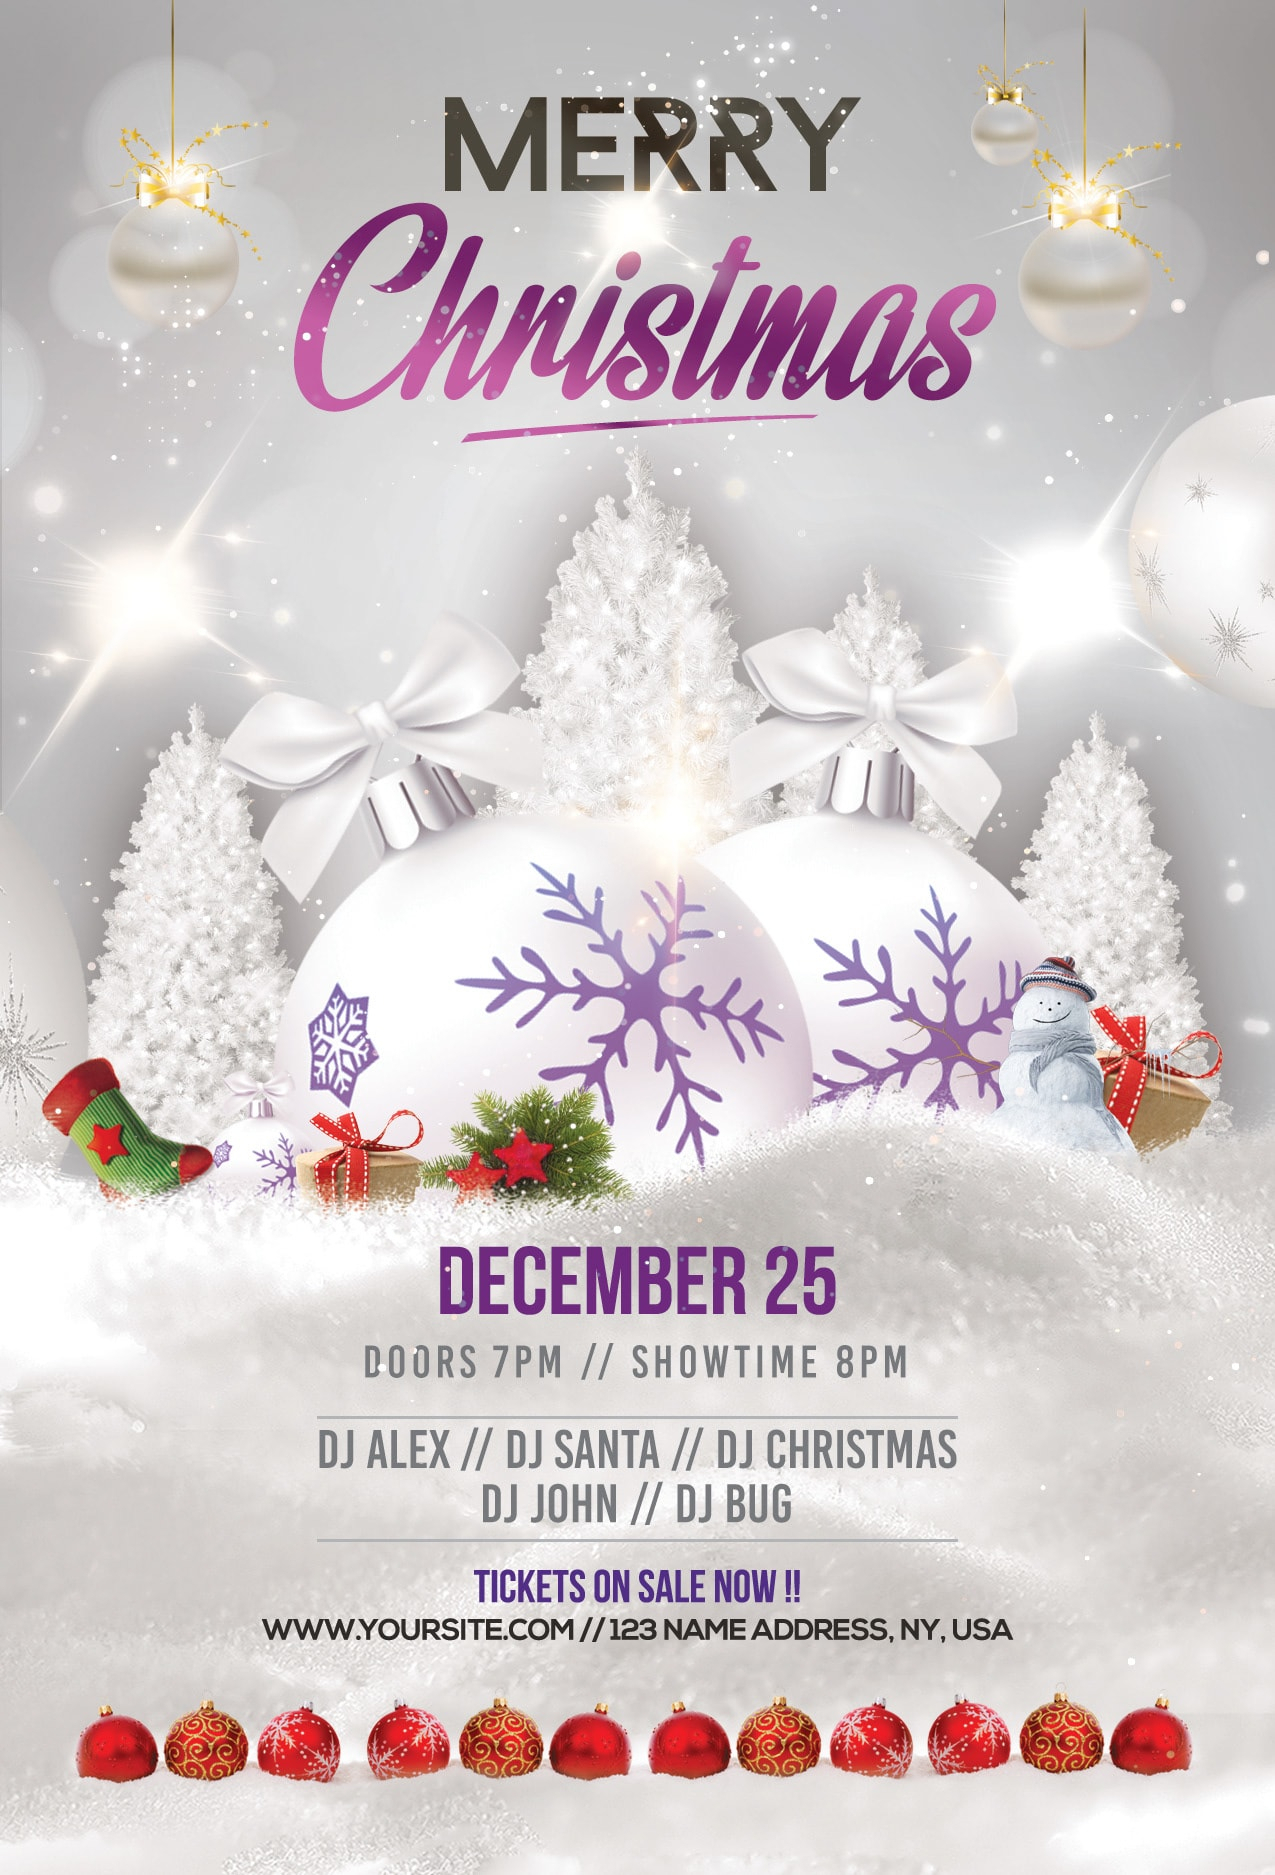 Merry Christmas & Holiday Free Psd Flyer Template – Free Psd Regarding Christmas Brochure Templates Free